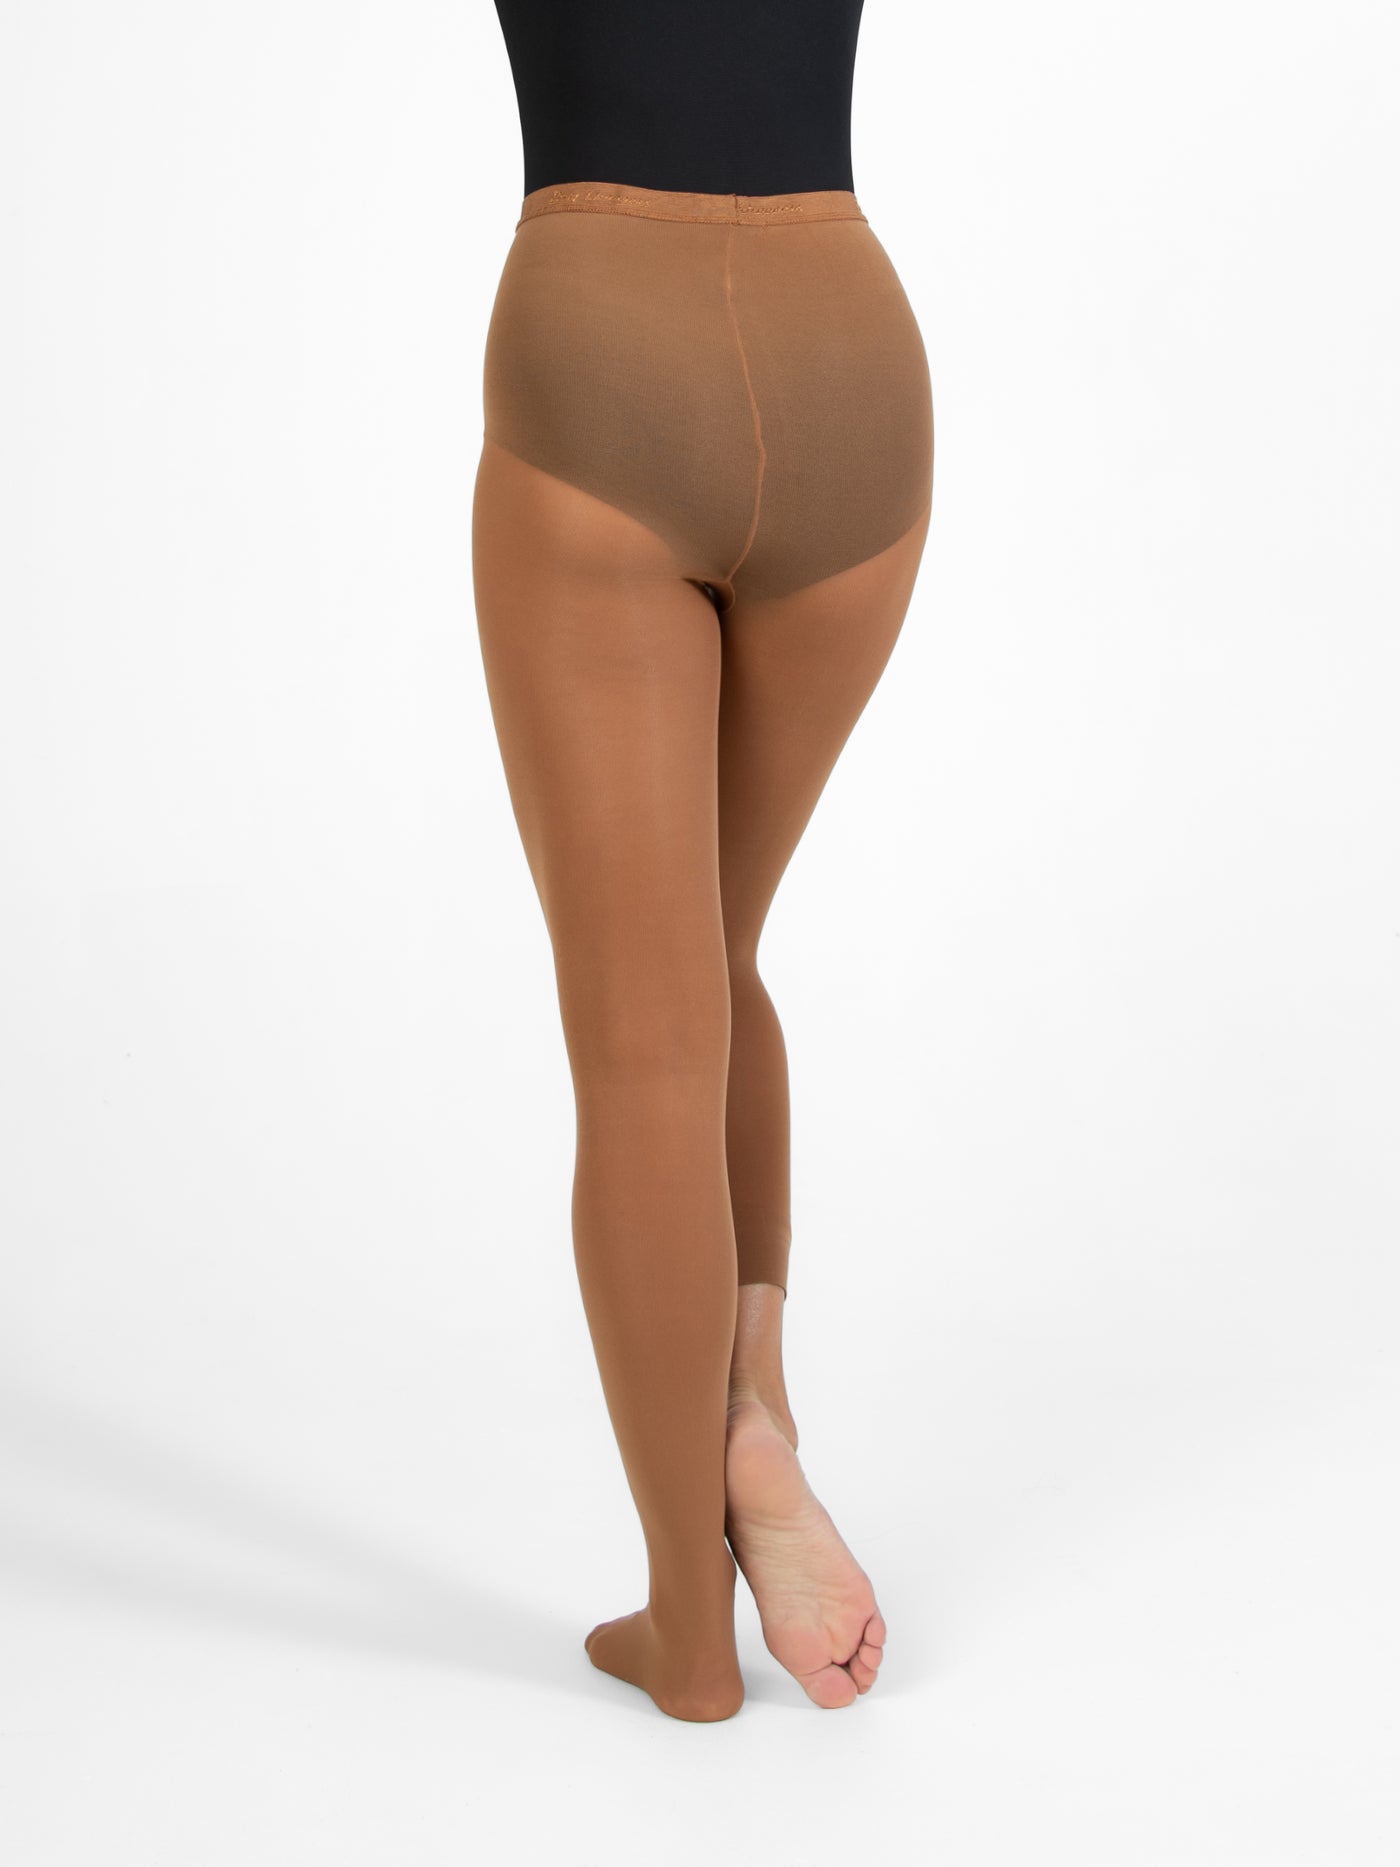 Total Stretch Convertible Tights by Body Wrappers